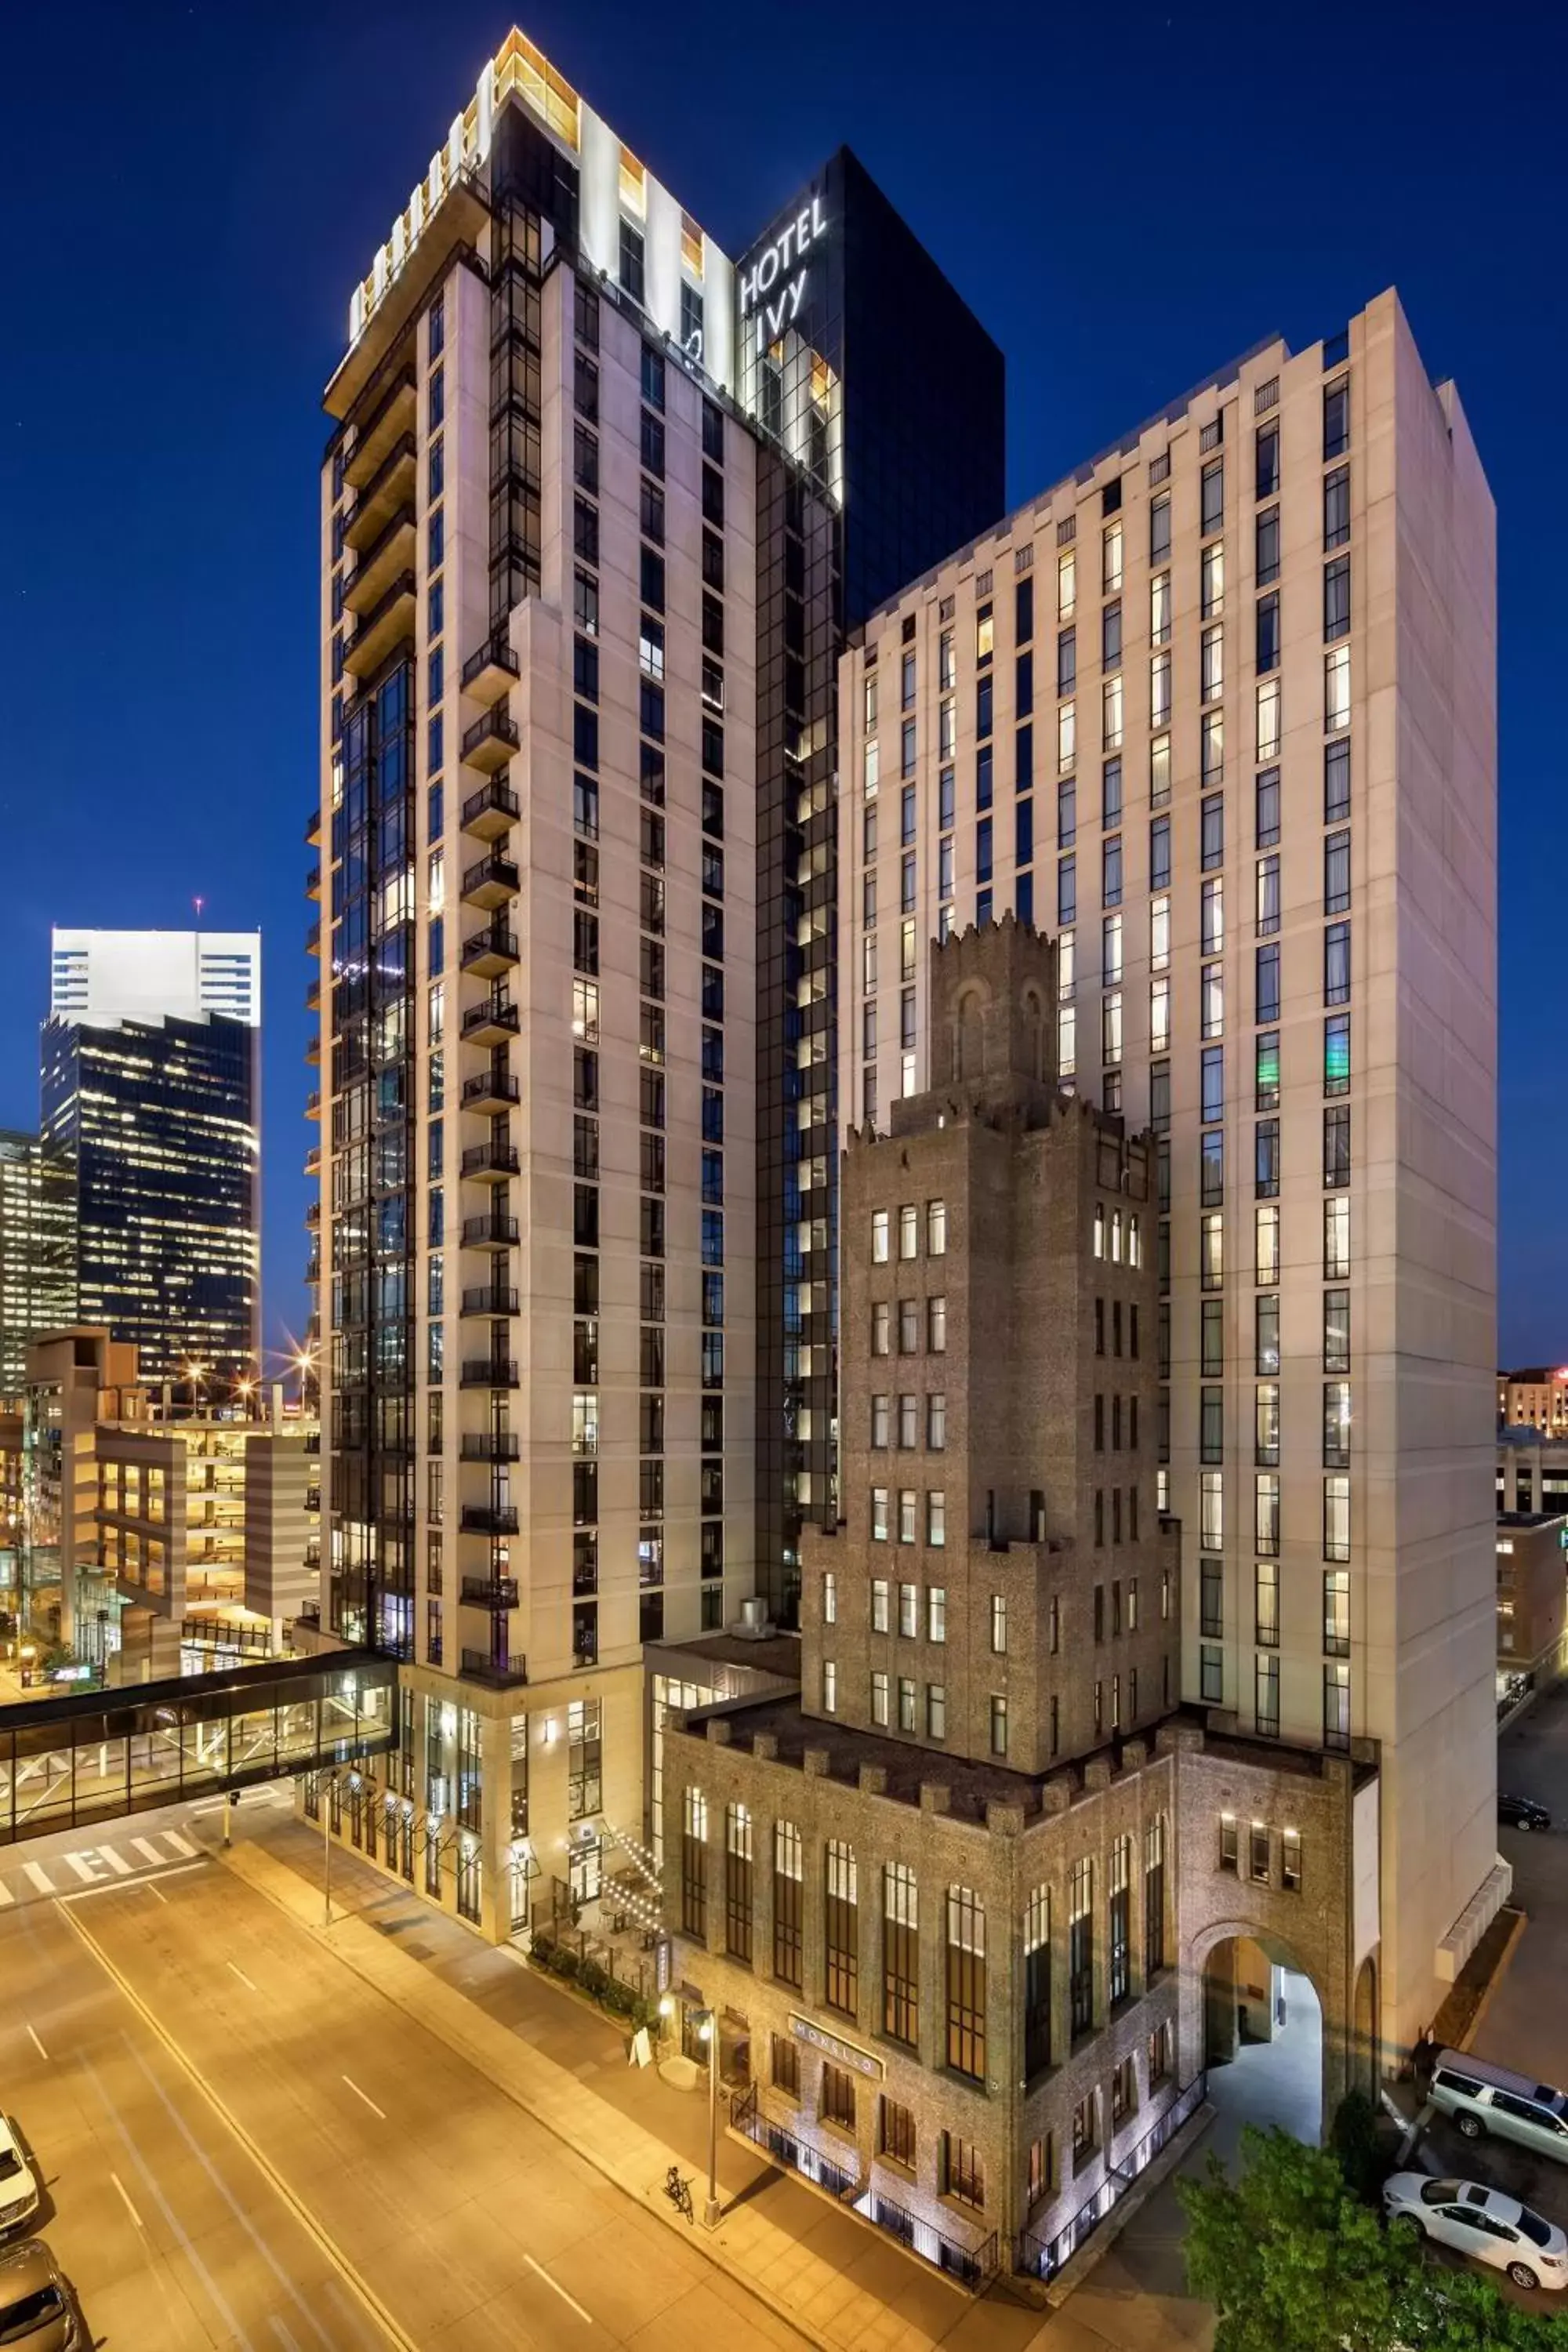 Property building in Hotel Ivy, a Luxury Collection Hotel, Minneapolis